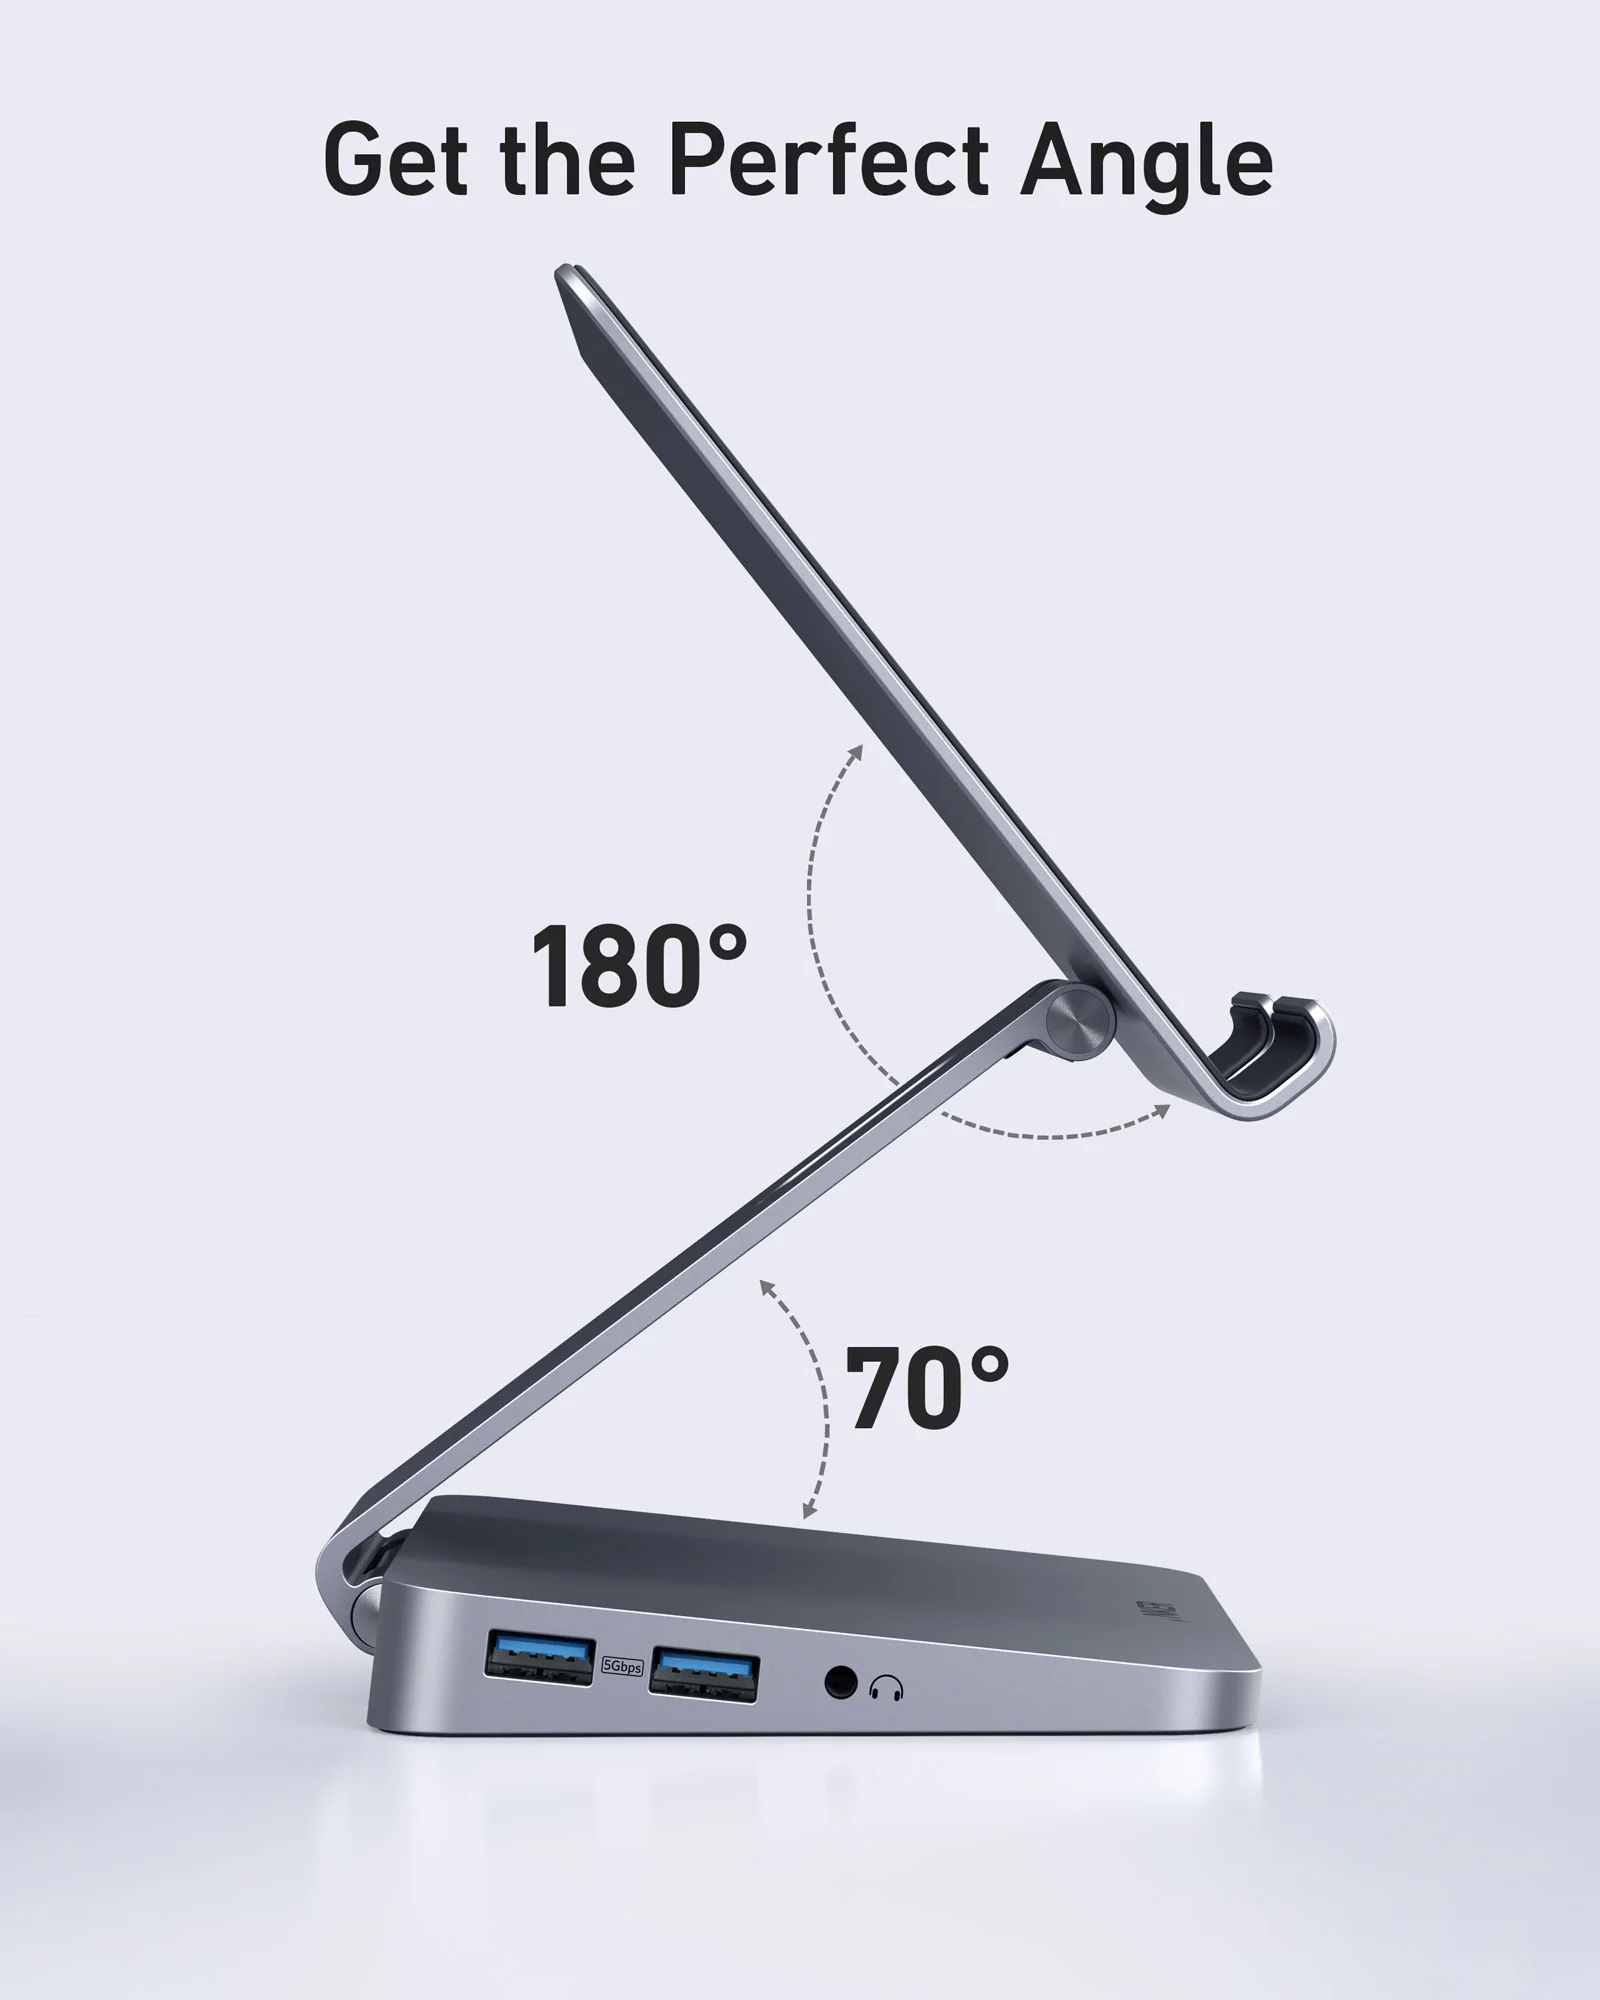 Anker 551 USB-C Hub (8-in-1, Tablet Stand)